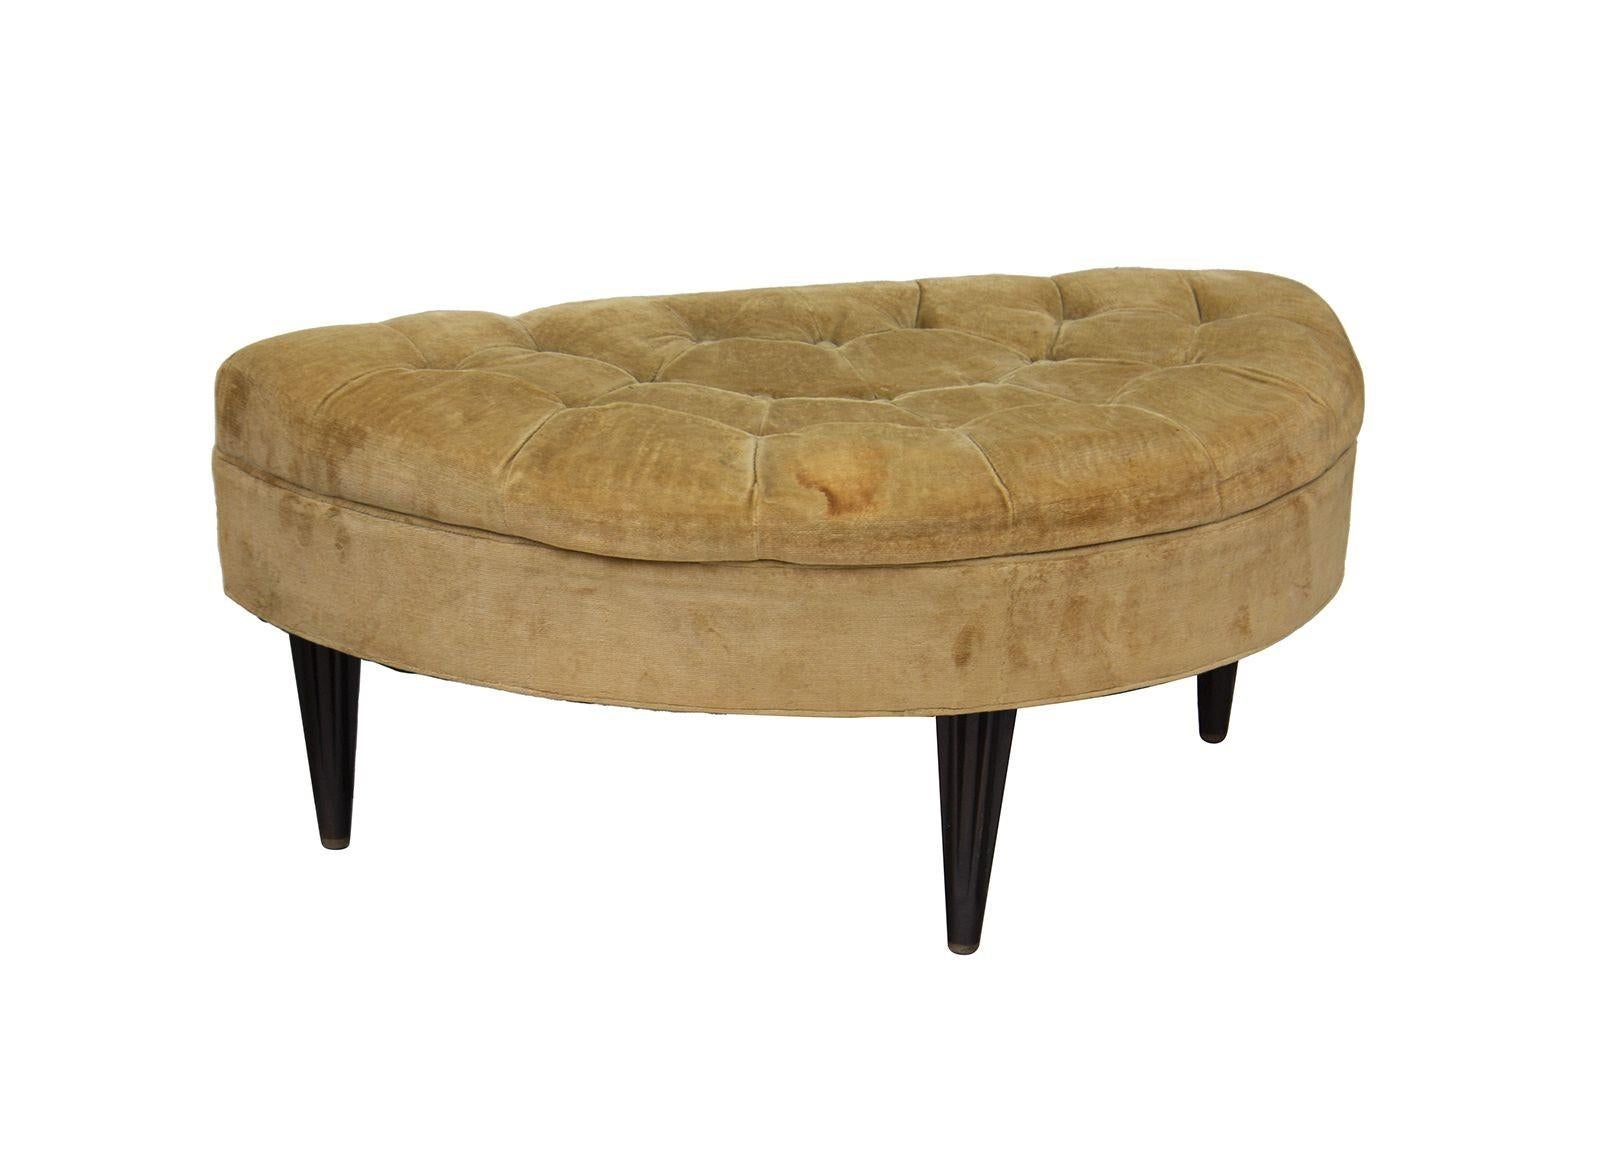 Mid-20th Century Tufted Demilune Ottoman by Dunbar with Fluted Legs For Sale